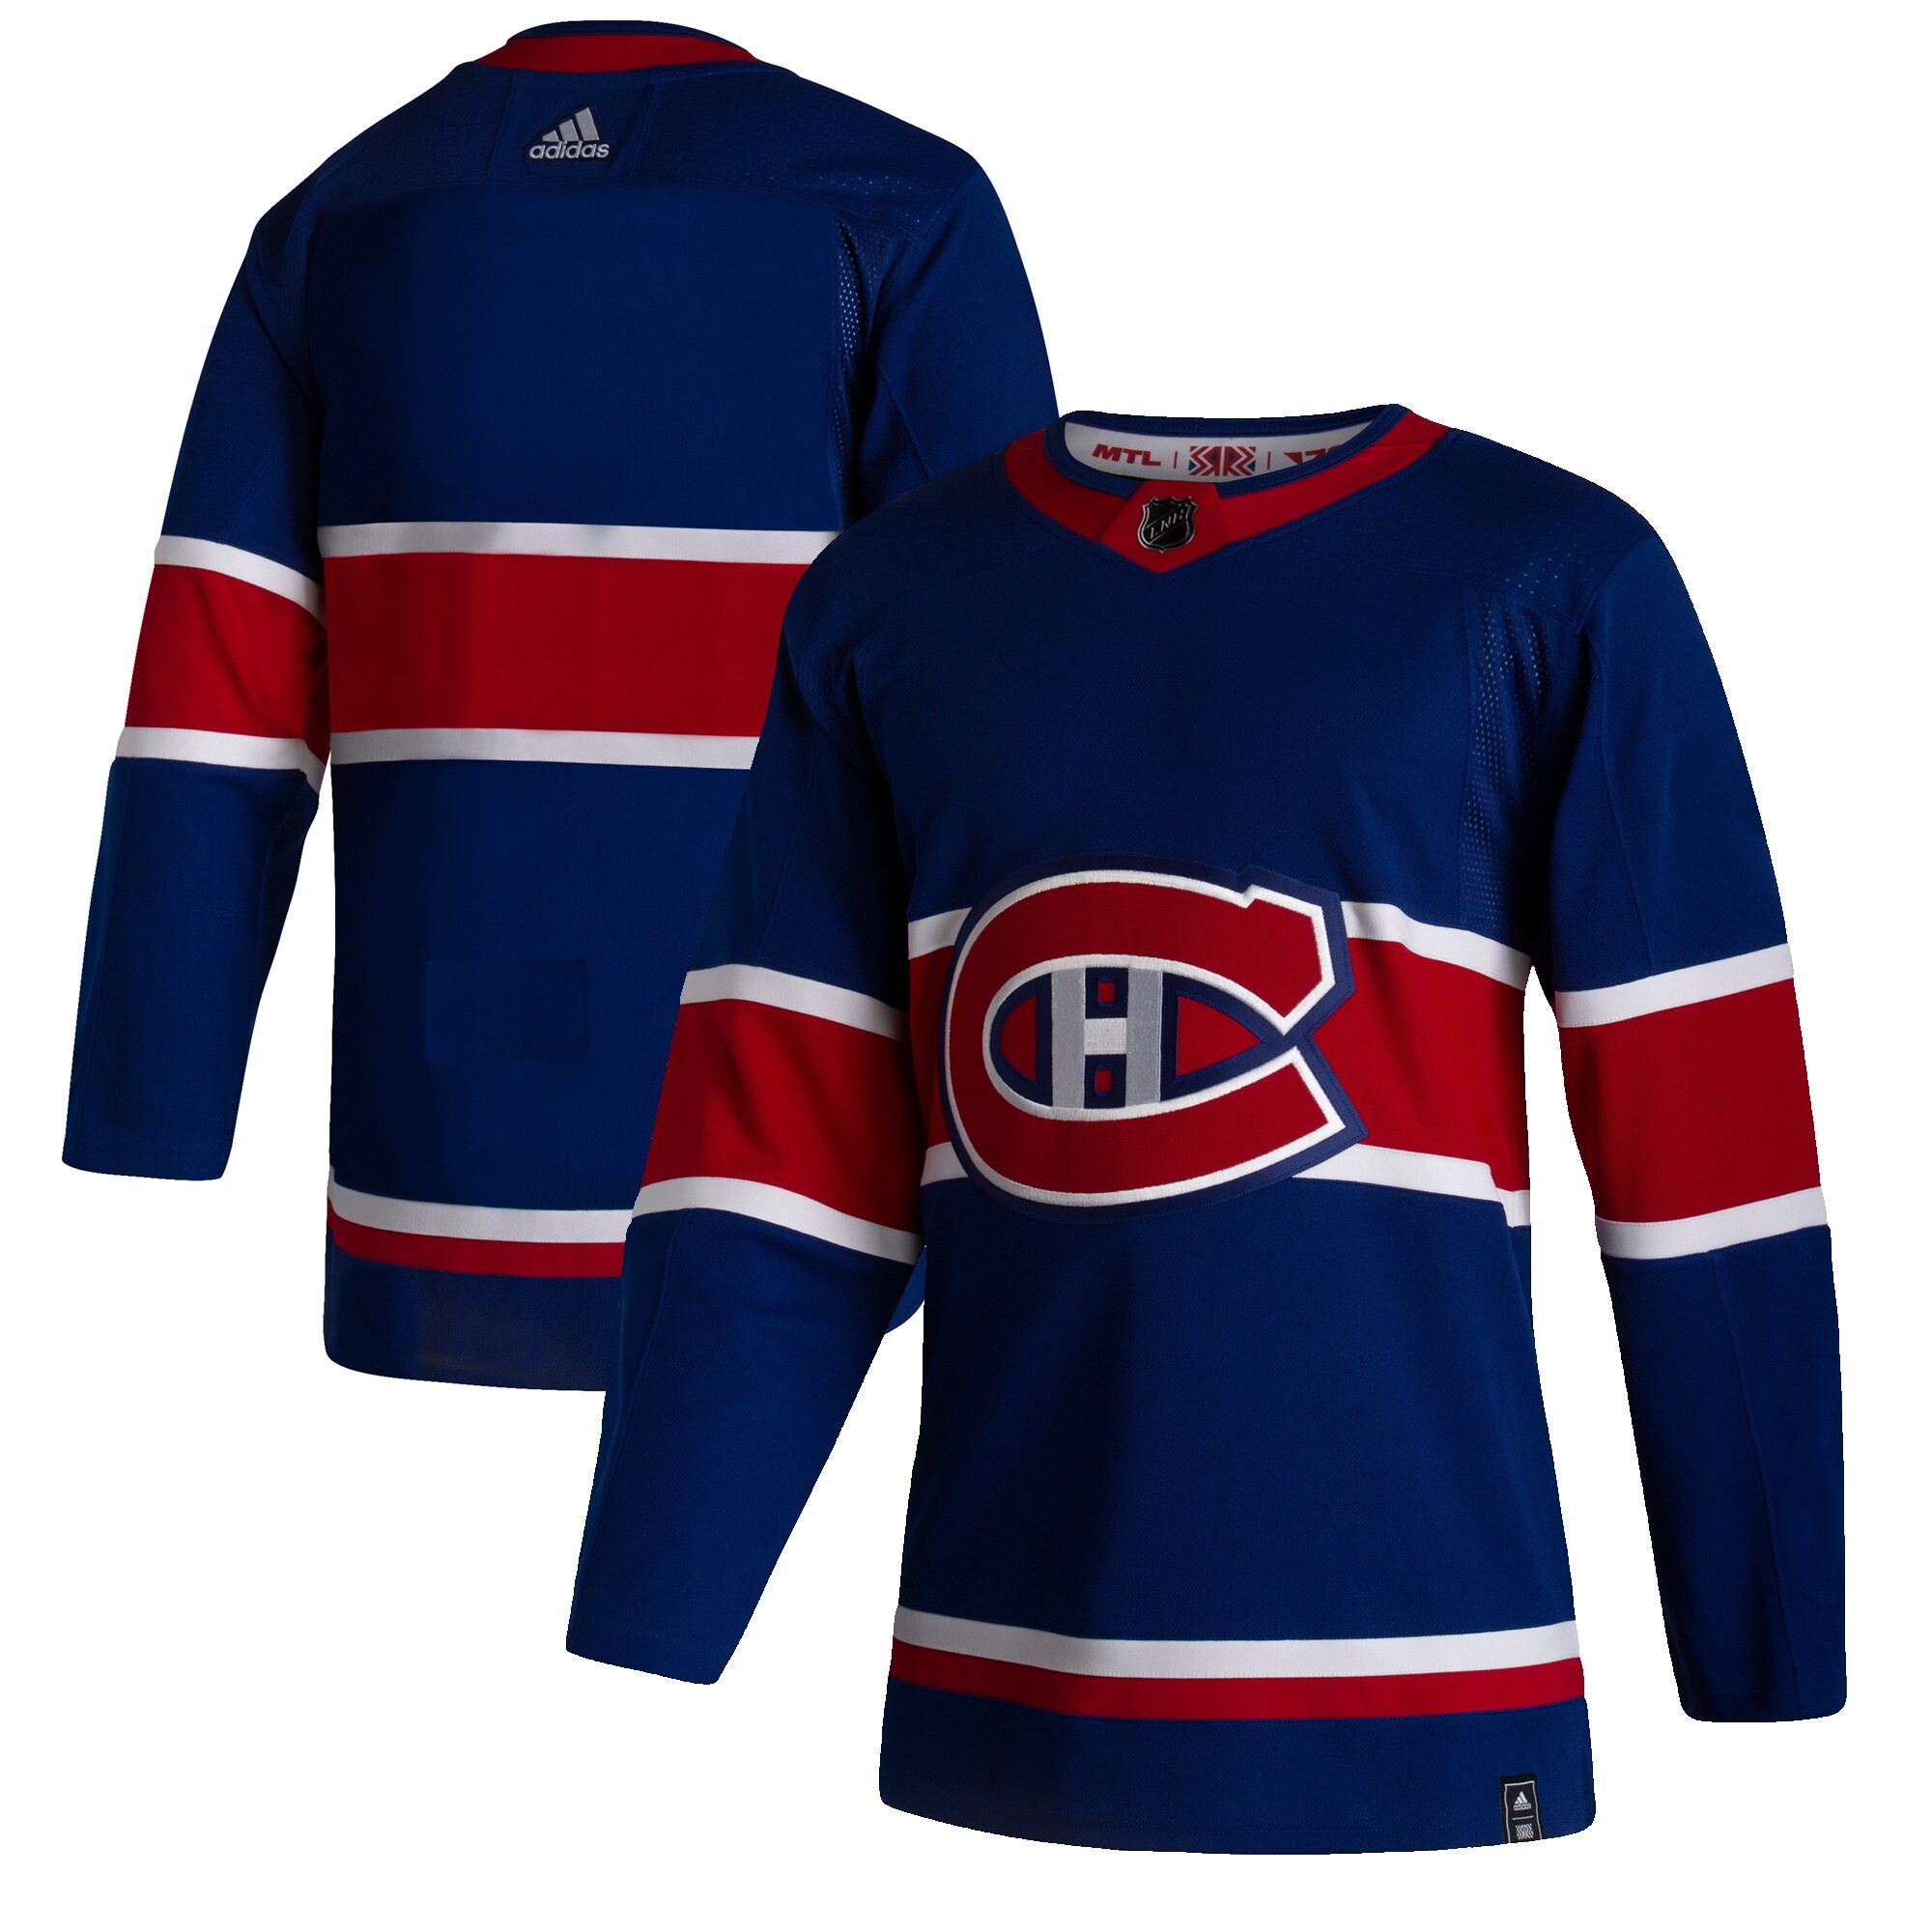 Montreal Candiens fans need to check out these new 'Reverse Retro' jerseys